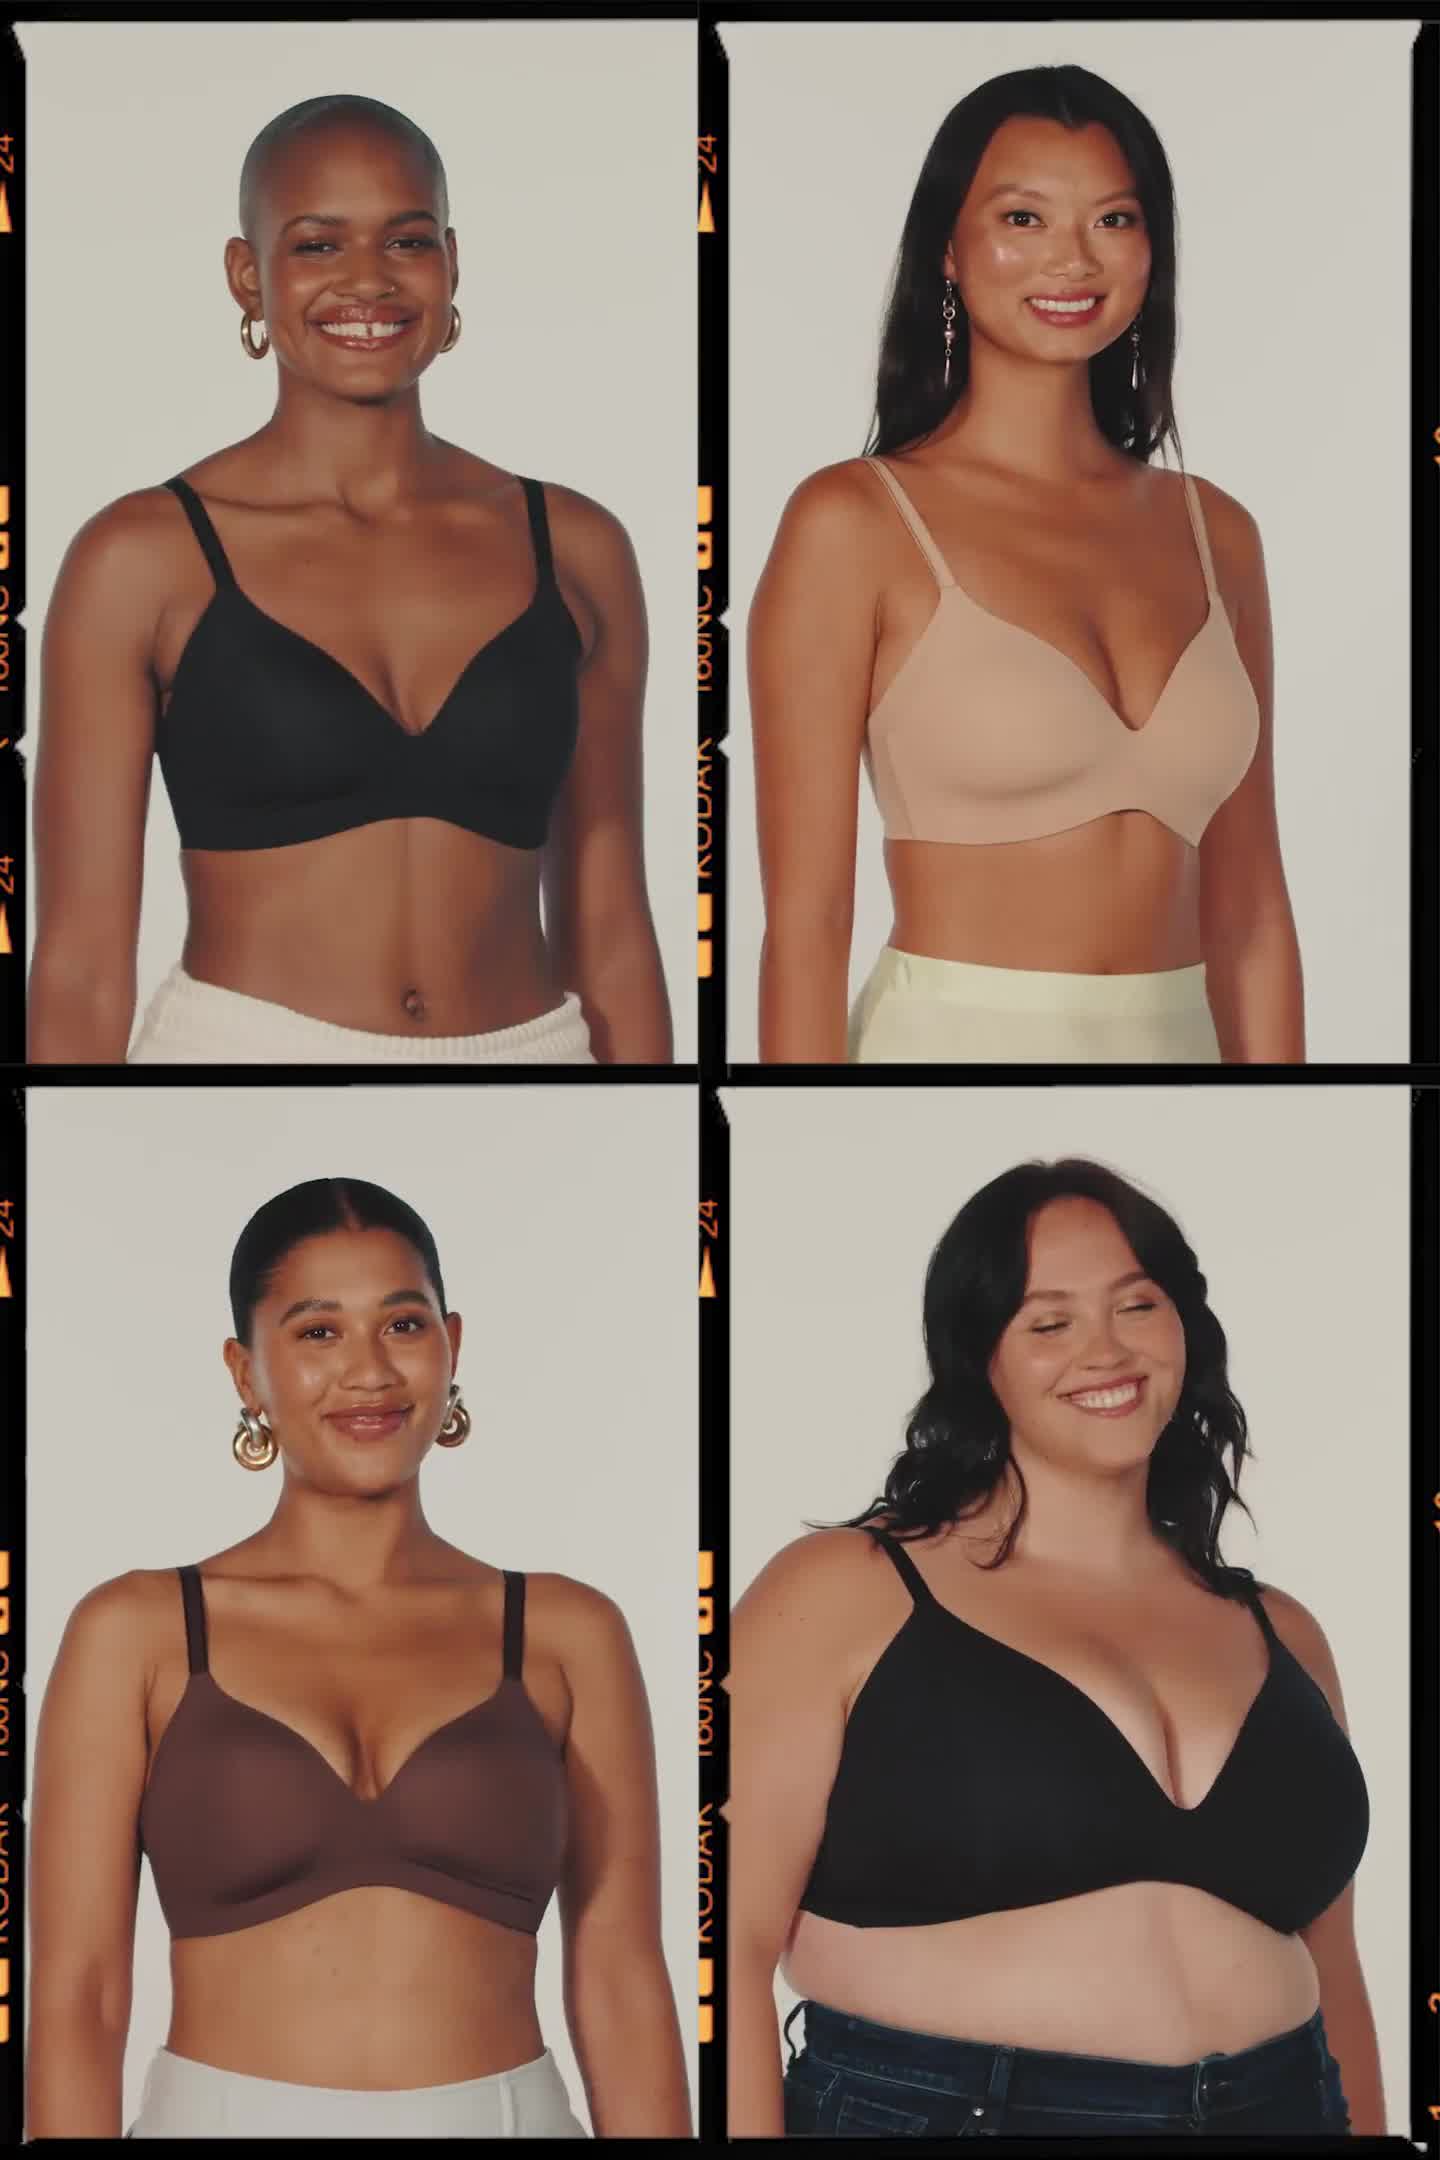 Daisy Lift Bras Reviews (Jan 2021)- Is It A Genuine Product? Watch Now!